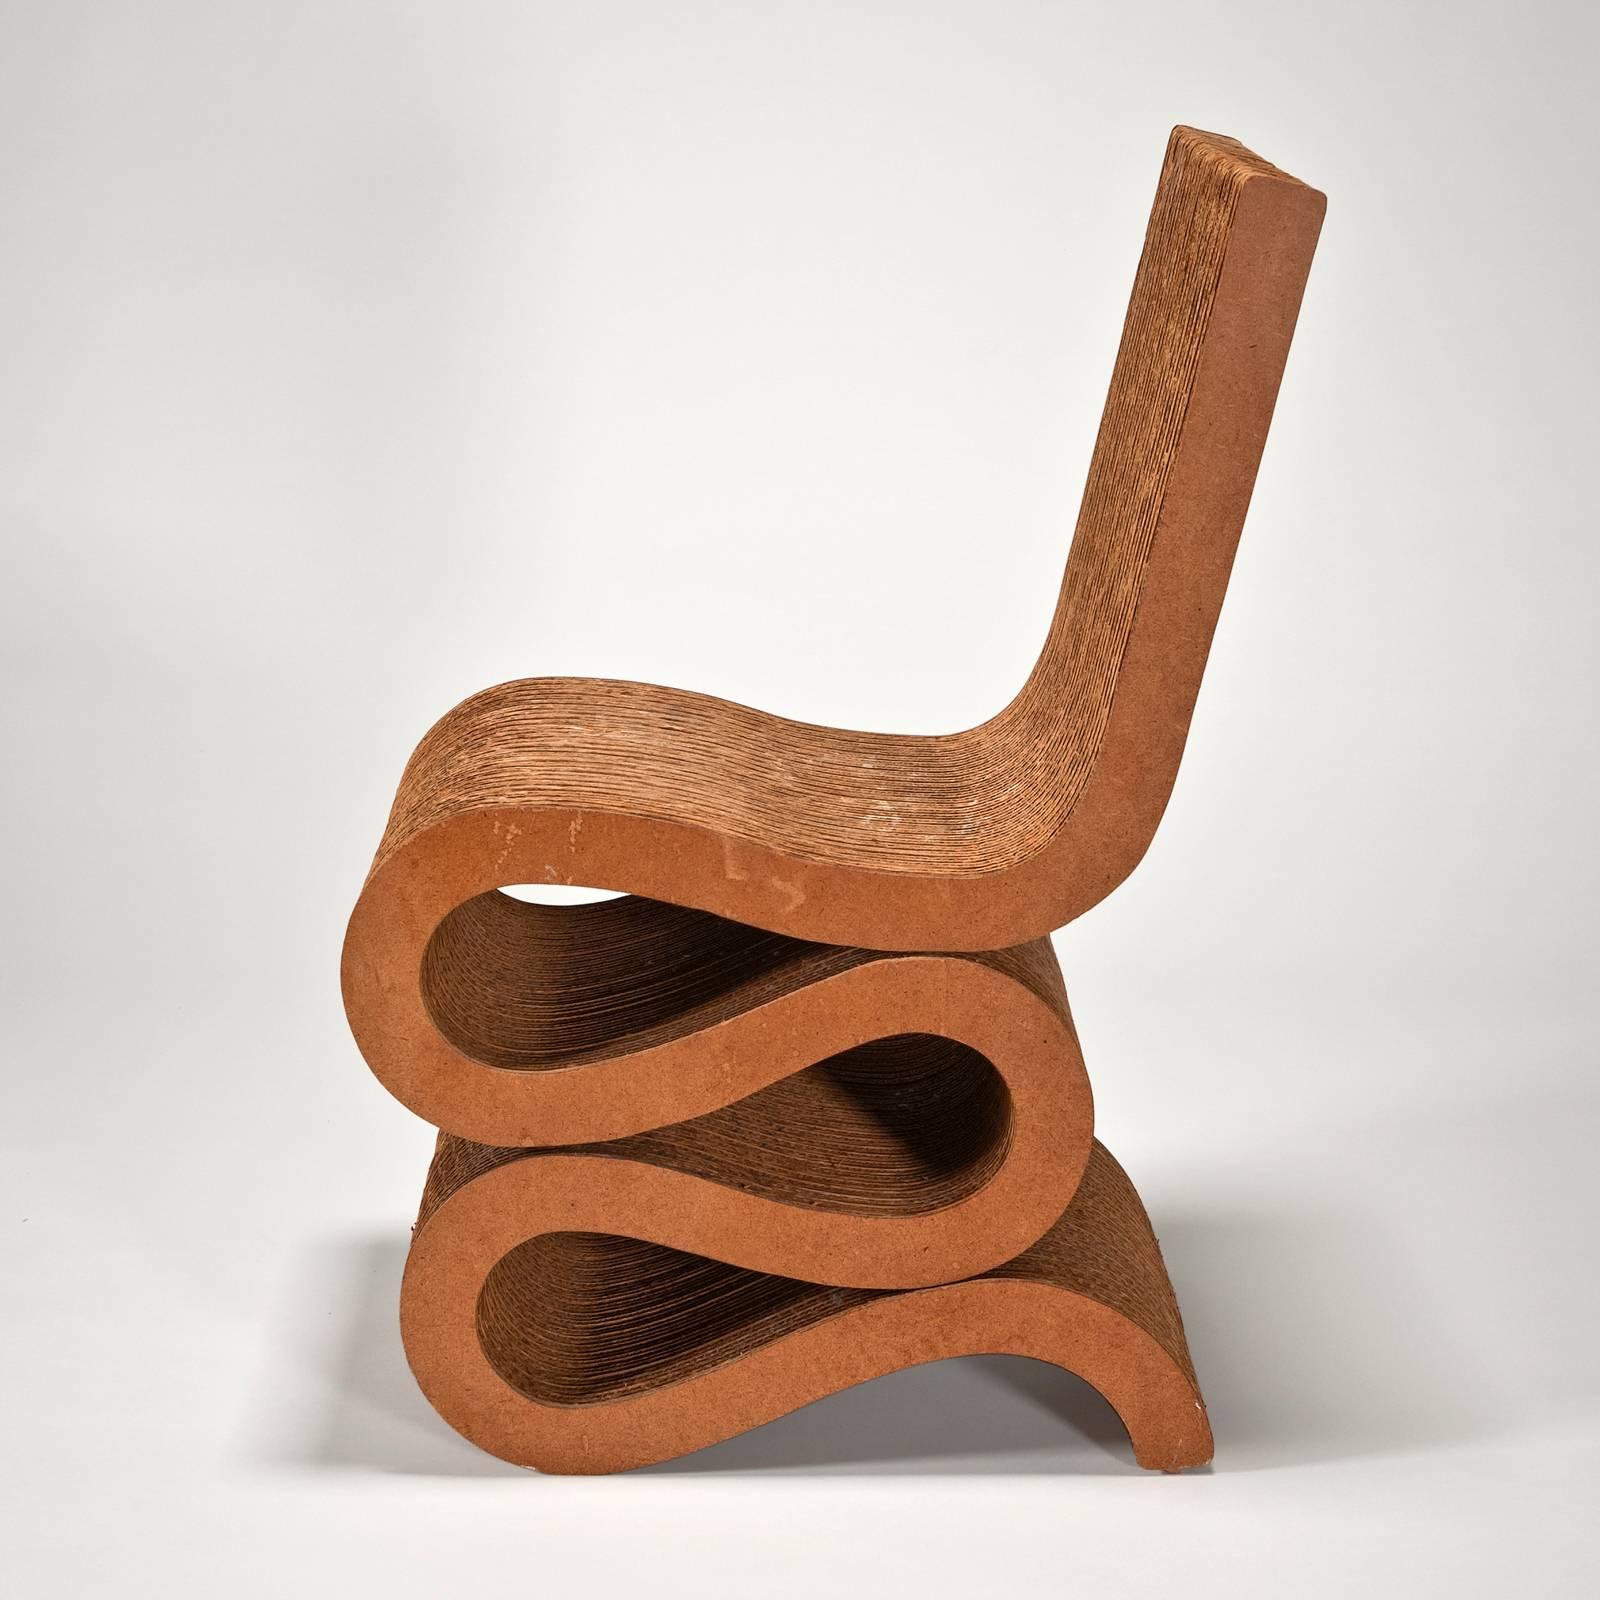 The Wiggle Side Chair, architect Frank O. Gehry's best-known design in cardboard, was designed in 1972. This example was produced by Easy Edges, Inc for Bloomingdale's. The cardboard seat and back have a beautiful suedelike patina. The condition is